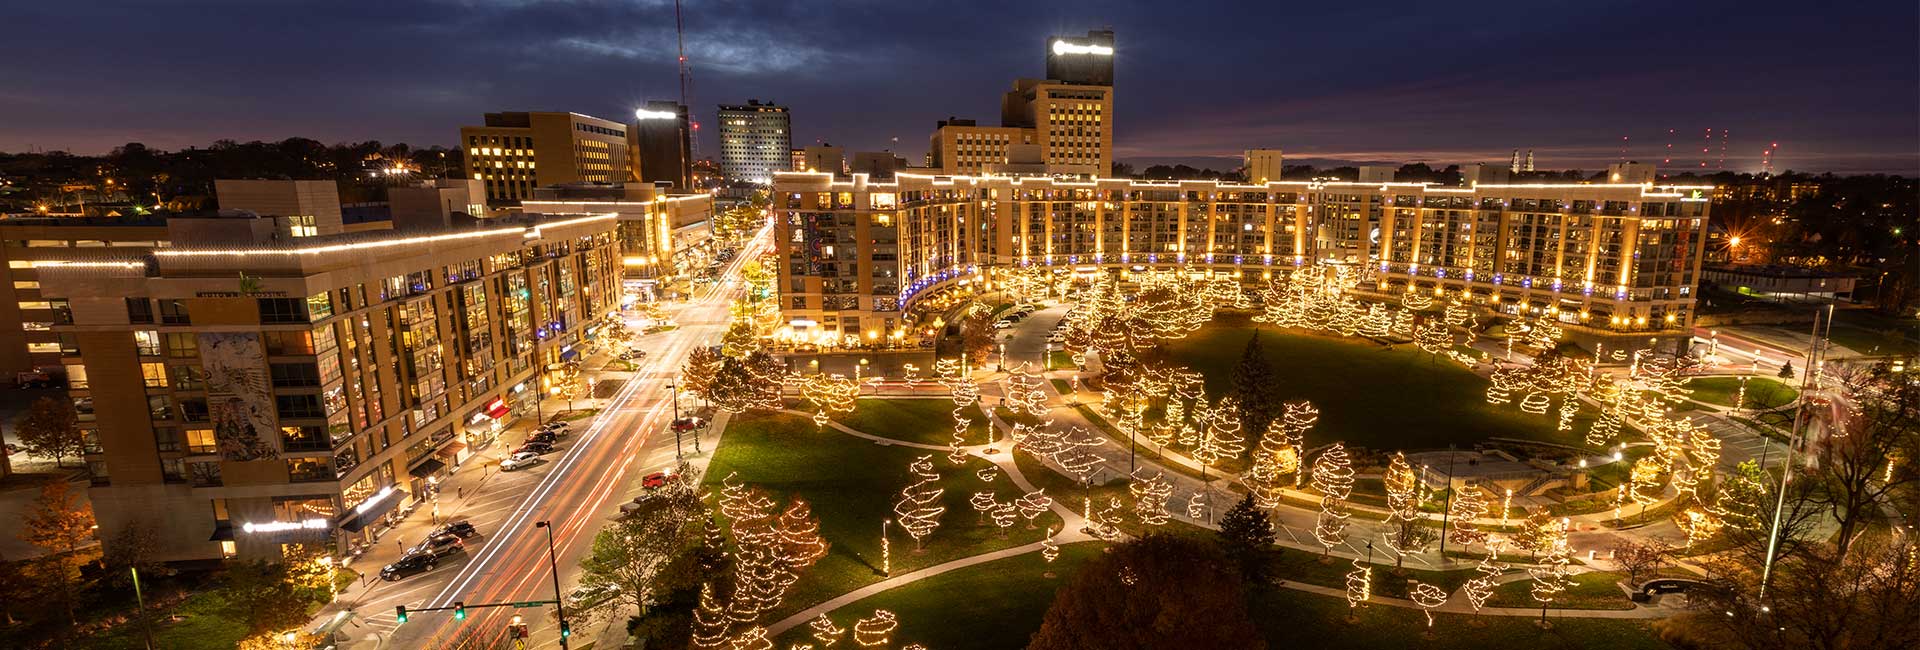 Aerial view of Turner Park holiday lights in Omaha, NE